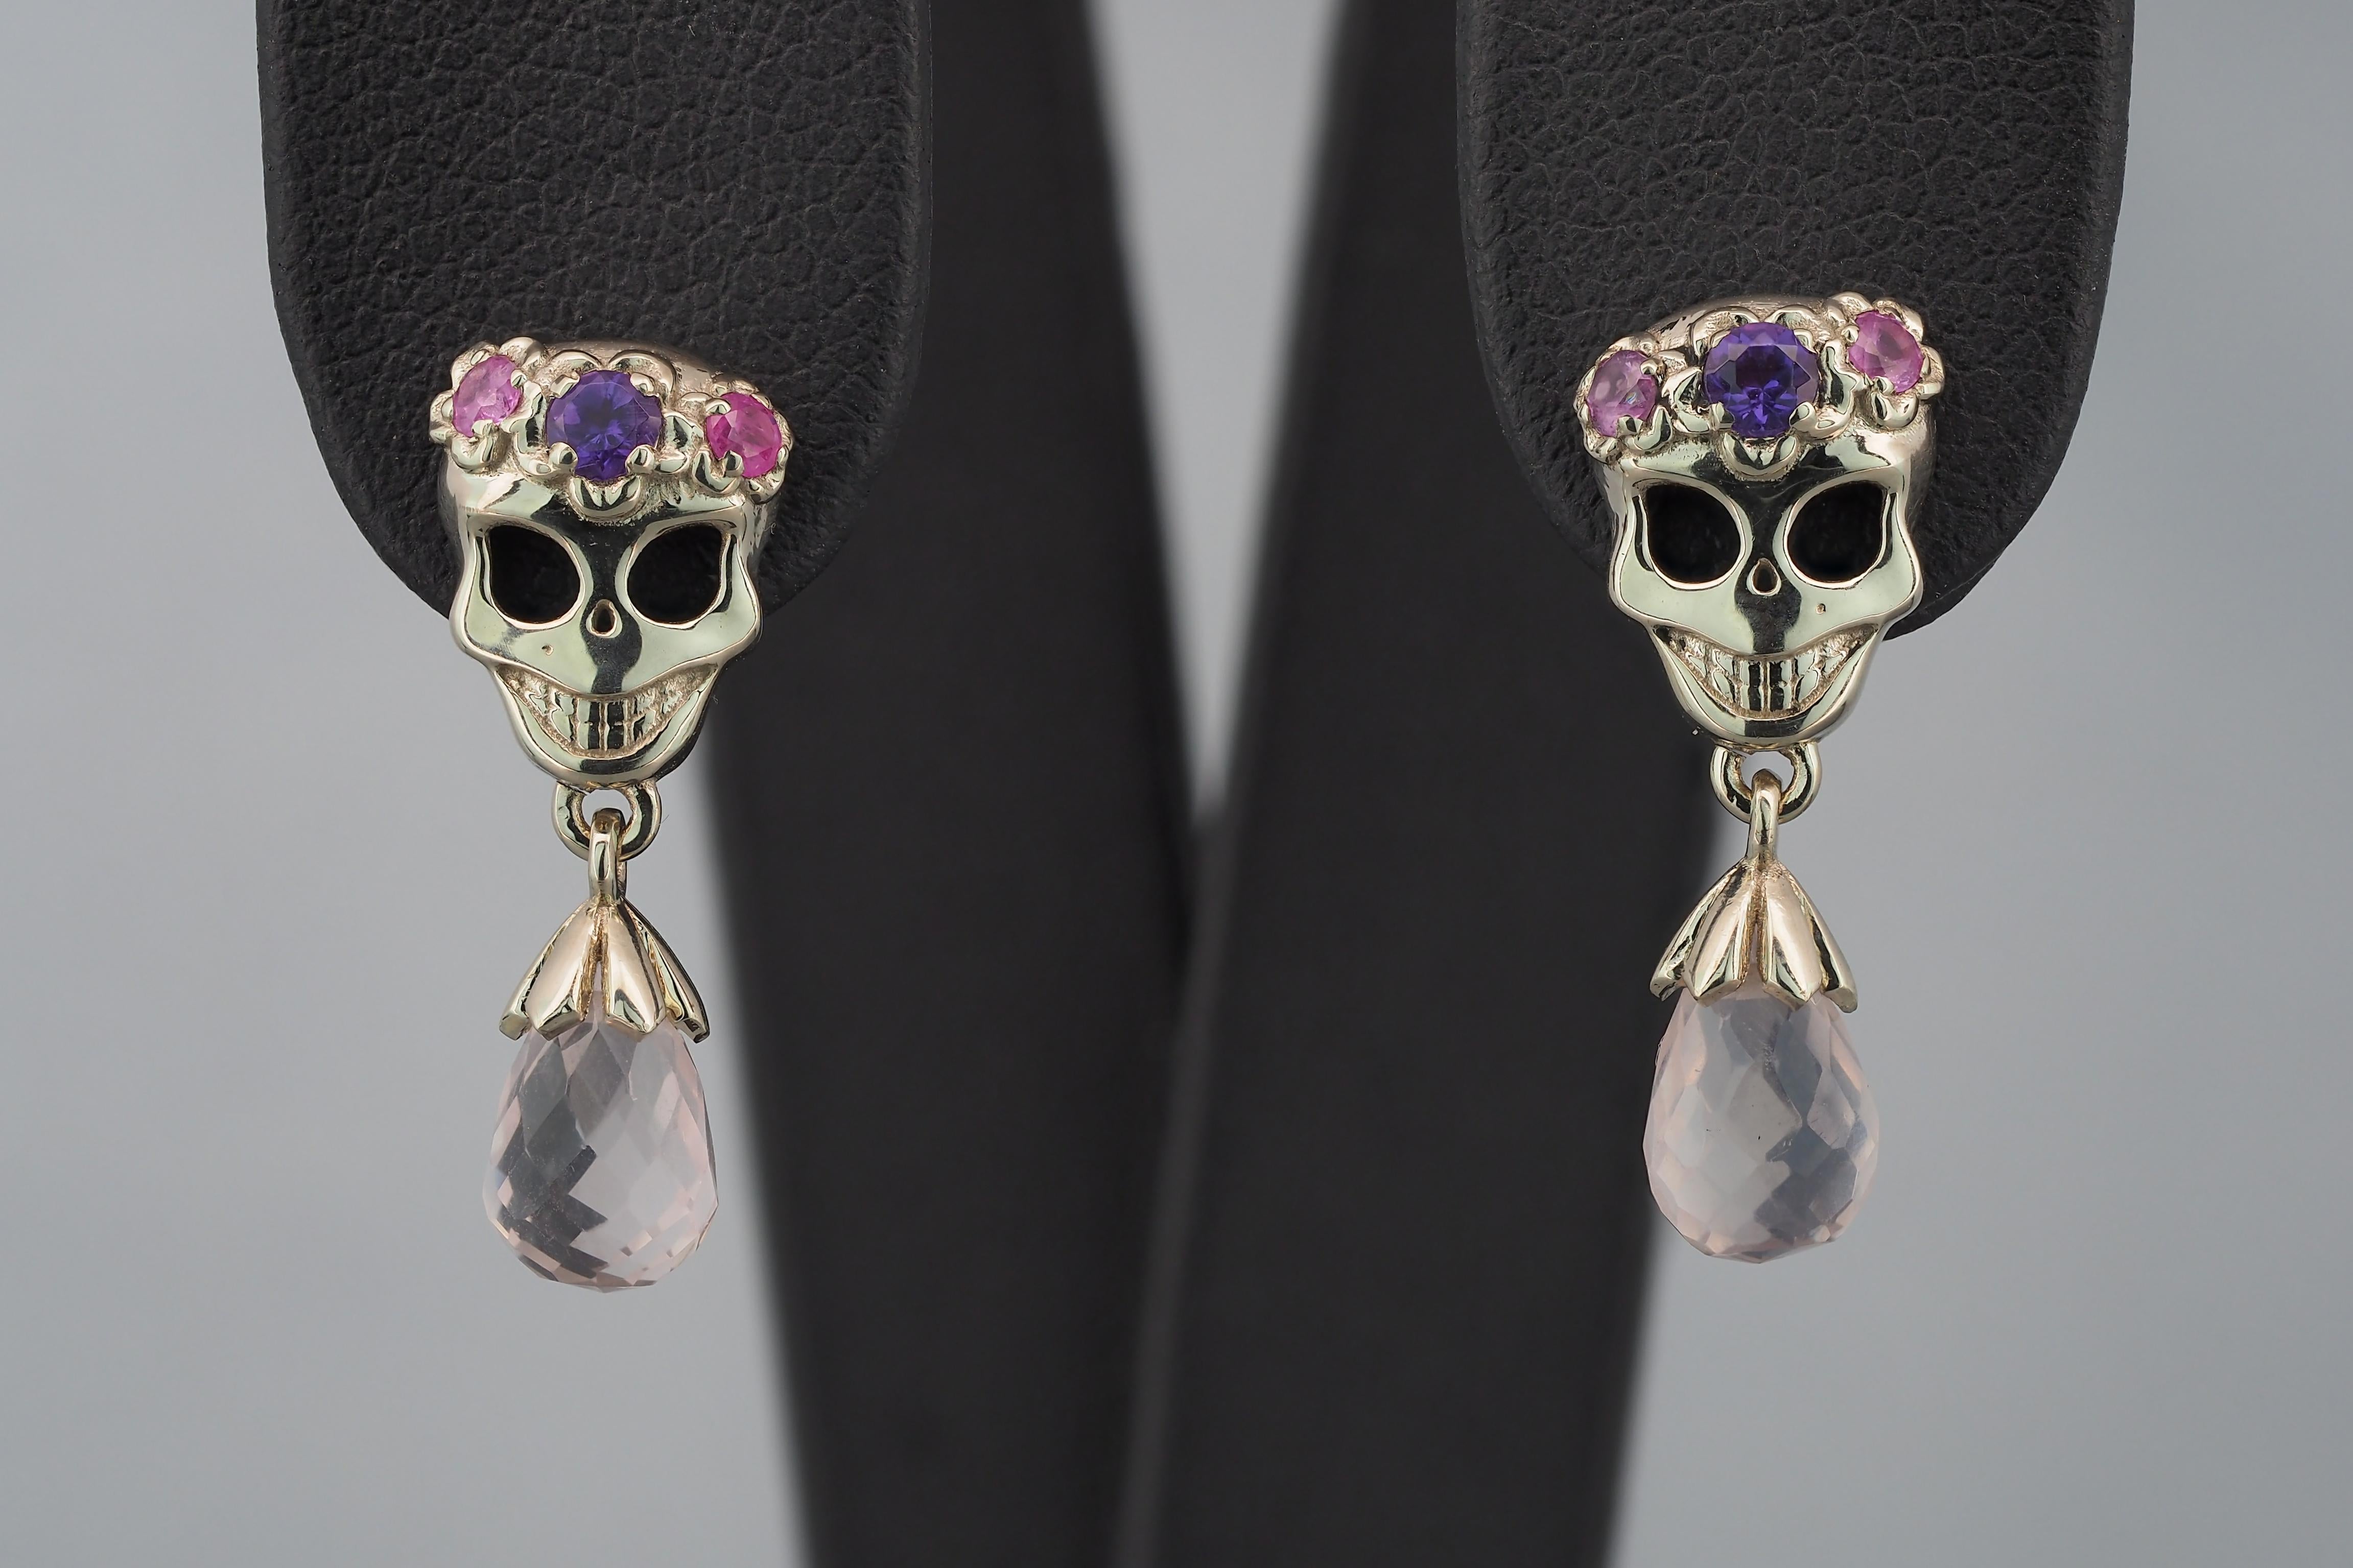 14 kt solid gold skull with flowers earrings studs with amethysts, sapphires and pink quartz. Halloween party jewelry.
Weight: 2.9 g.
Earrings size: 20 x 8 mm.

Gemstones:
Natural amethysts: 2 pieces, weight - approx 0.20 ct total
Violet color,